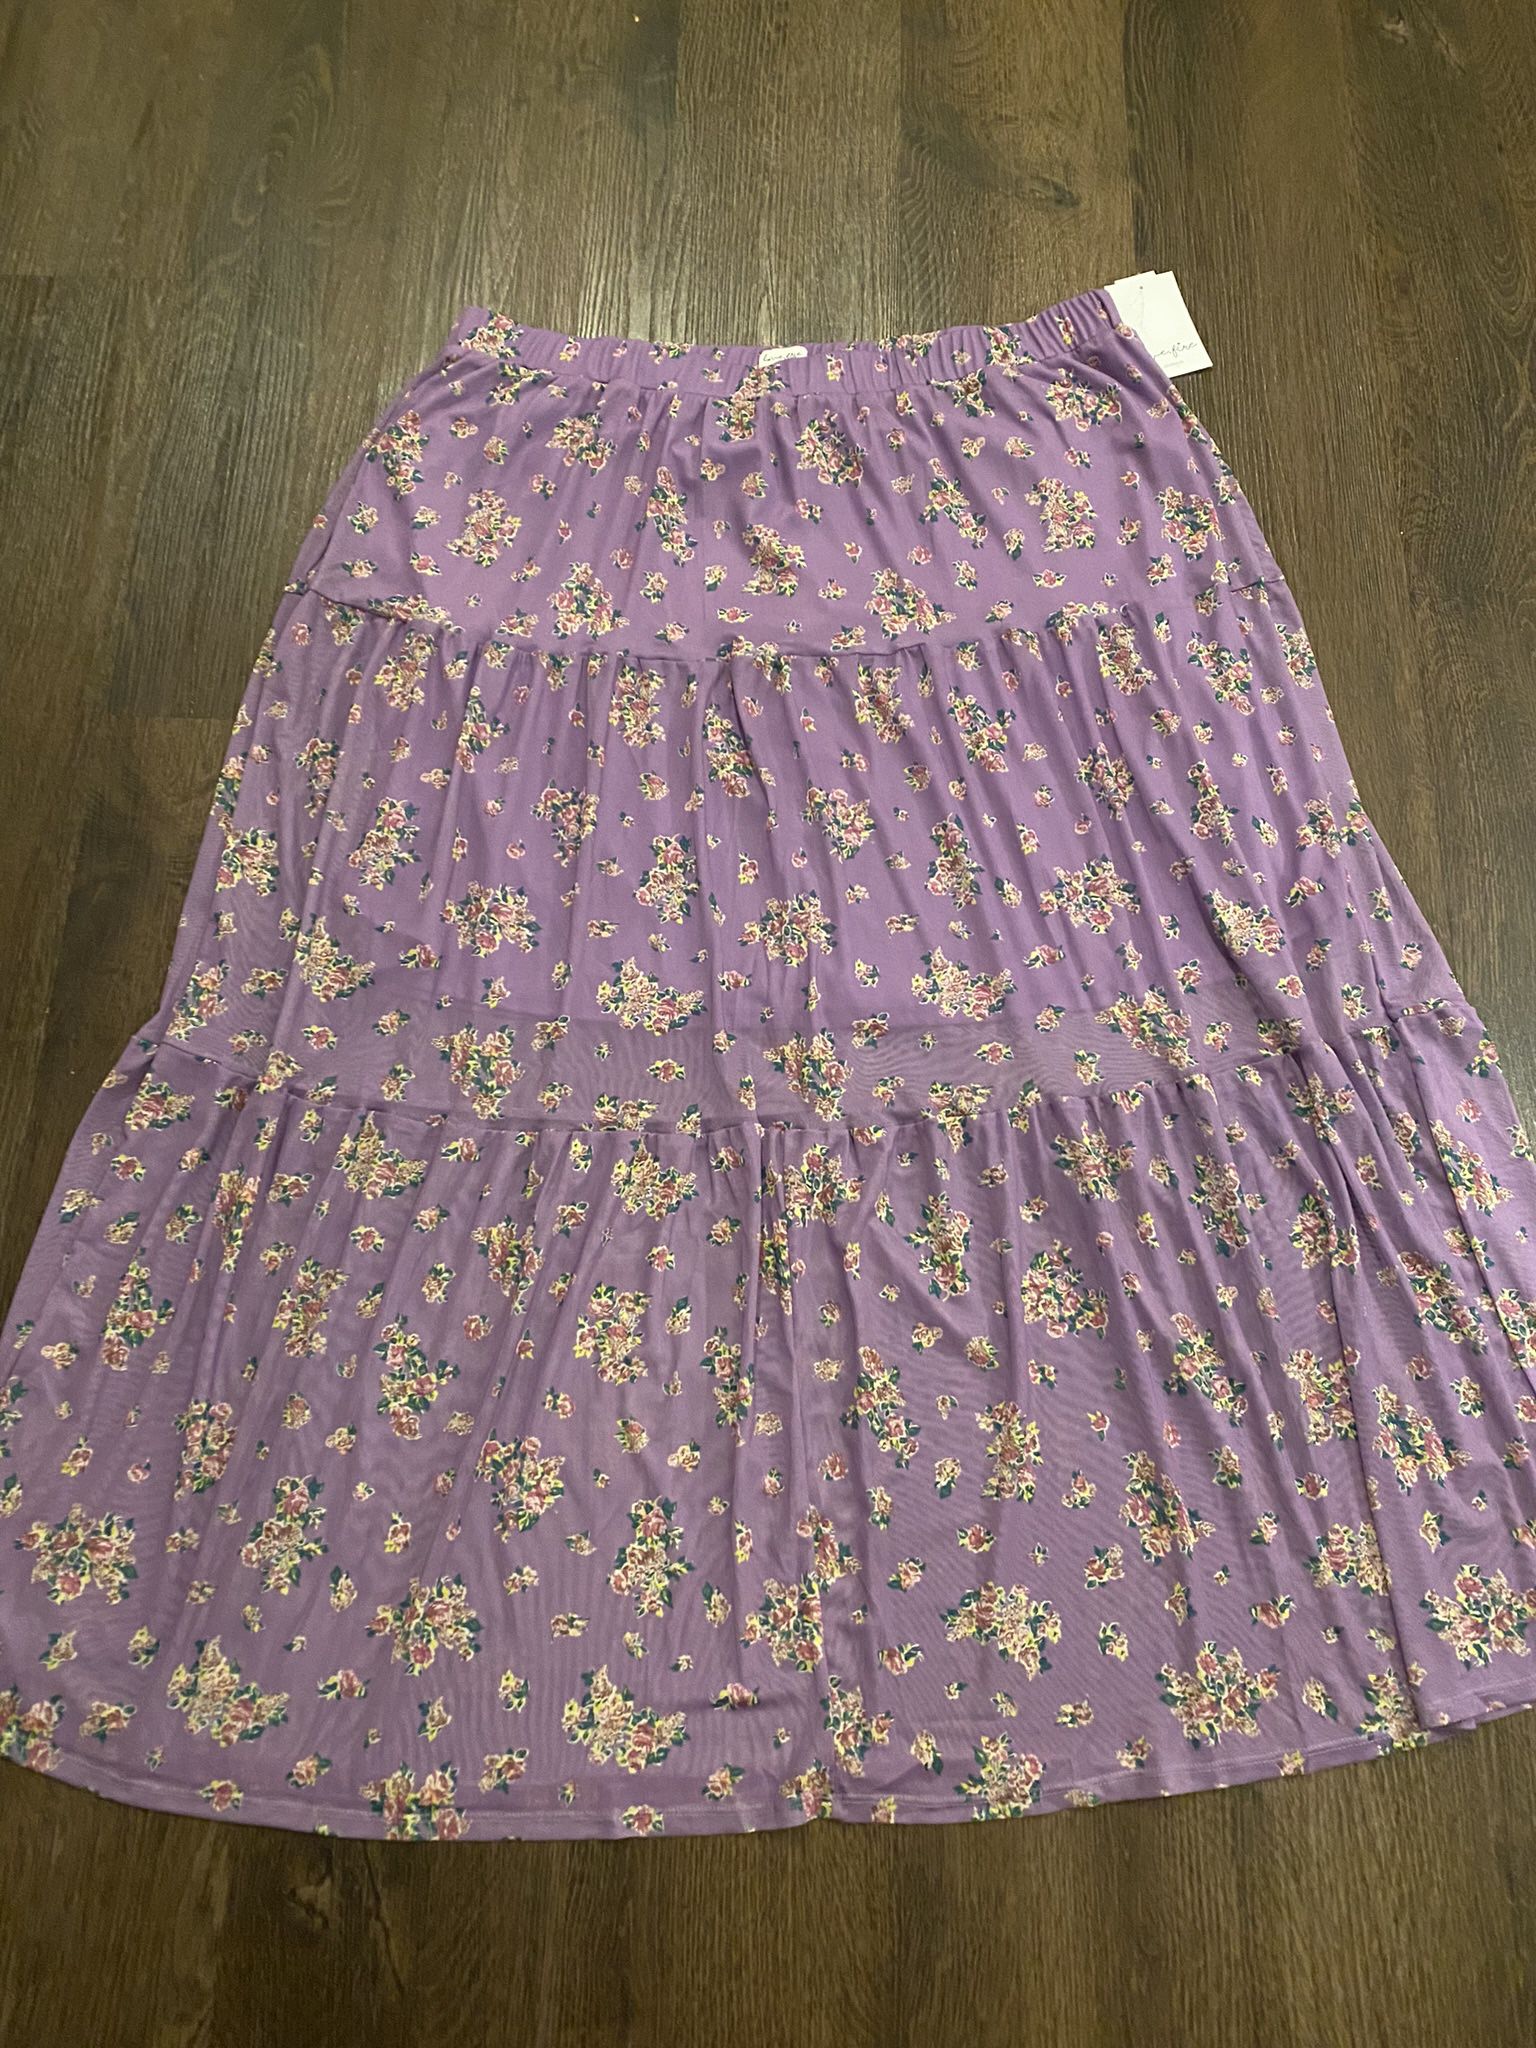 NEW Womans Purple Skirt Size 2x By Love Fire #5